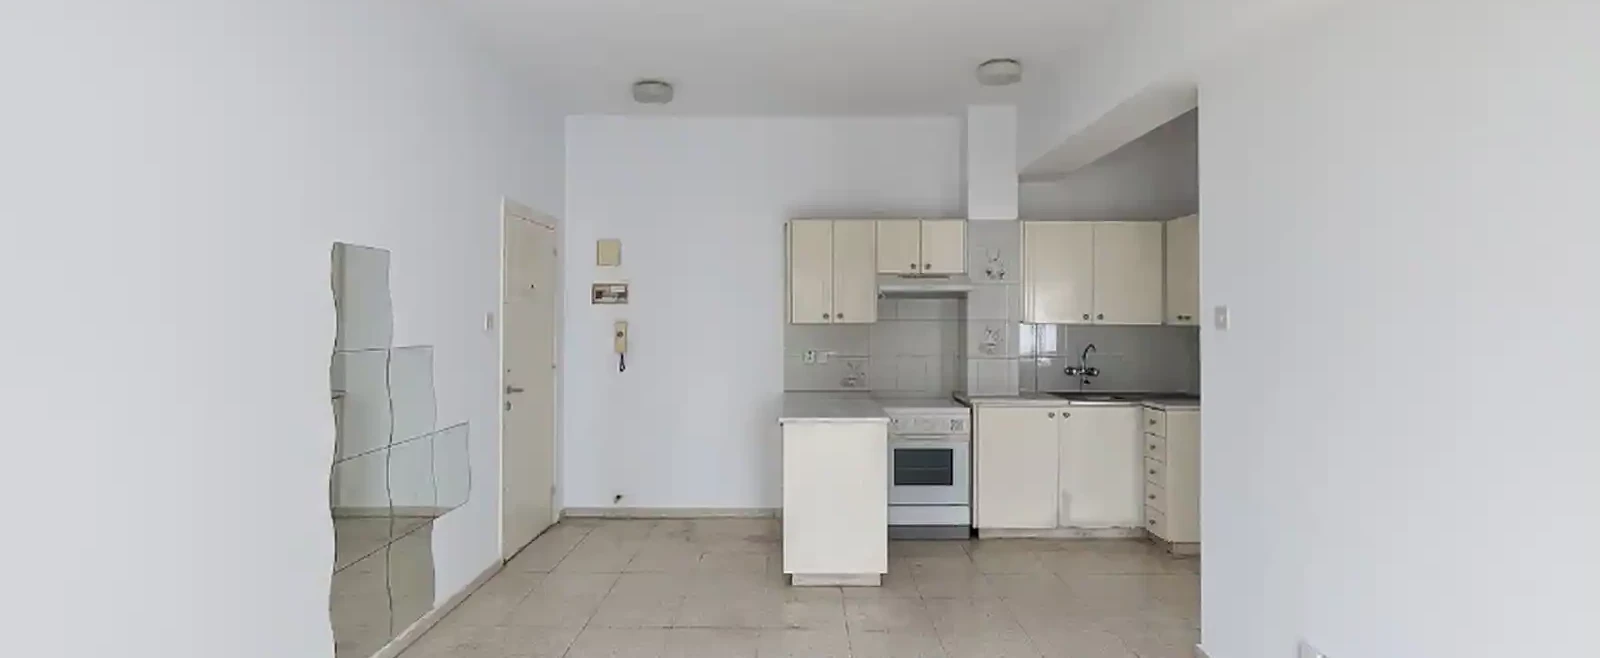 1-bedroom apartment fоr sаle €65.000, image 1